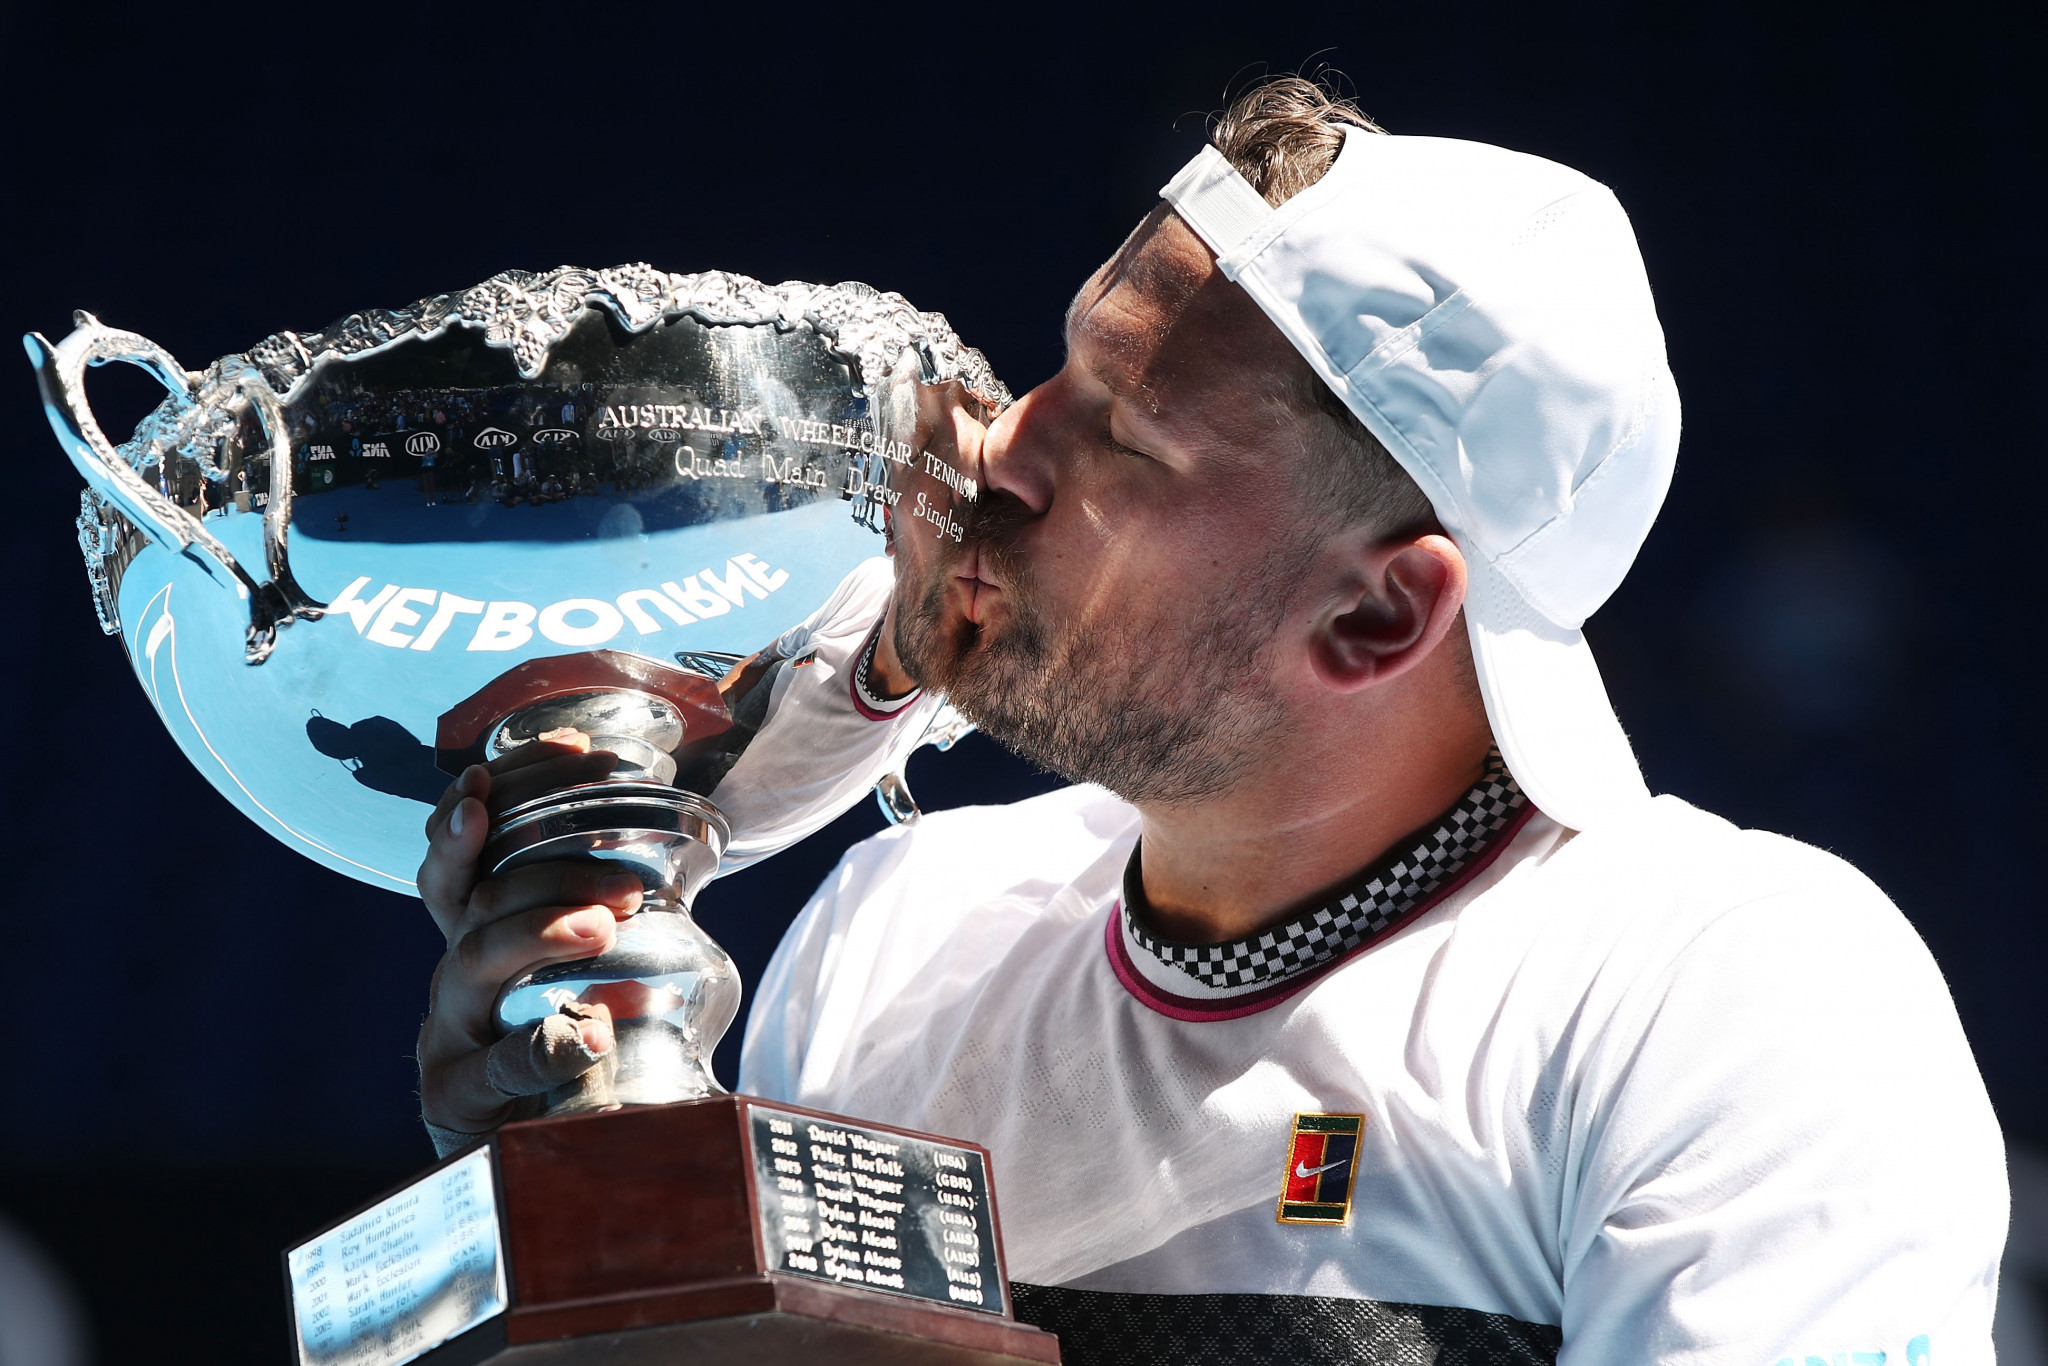 Dylan Alcott won both the singles and doubles quad titles at last month's Australian Open ©Getty Images